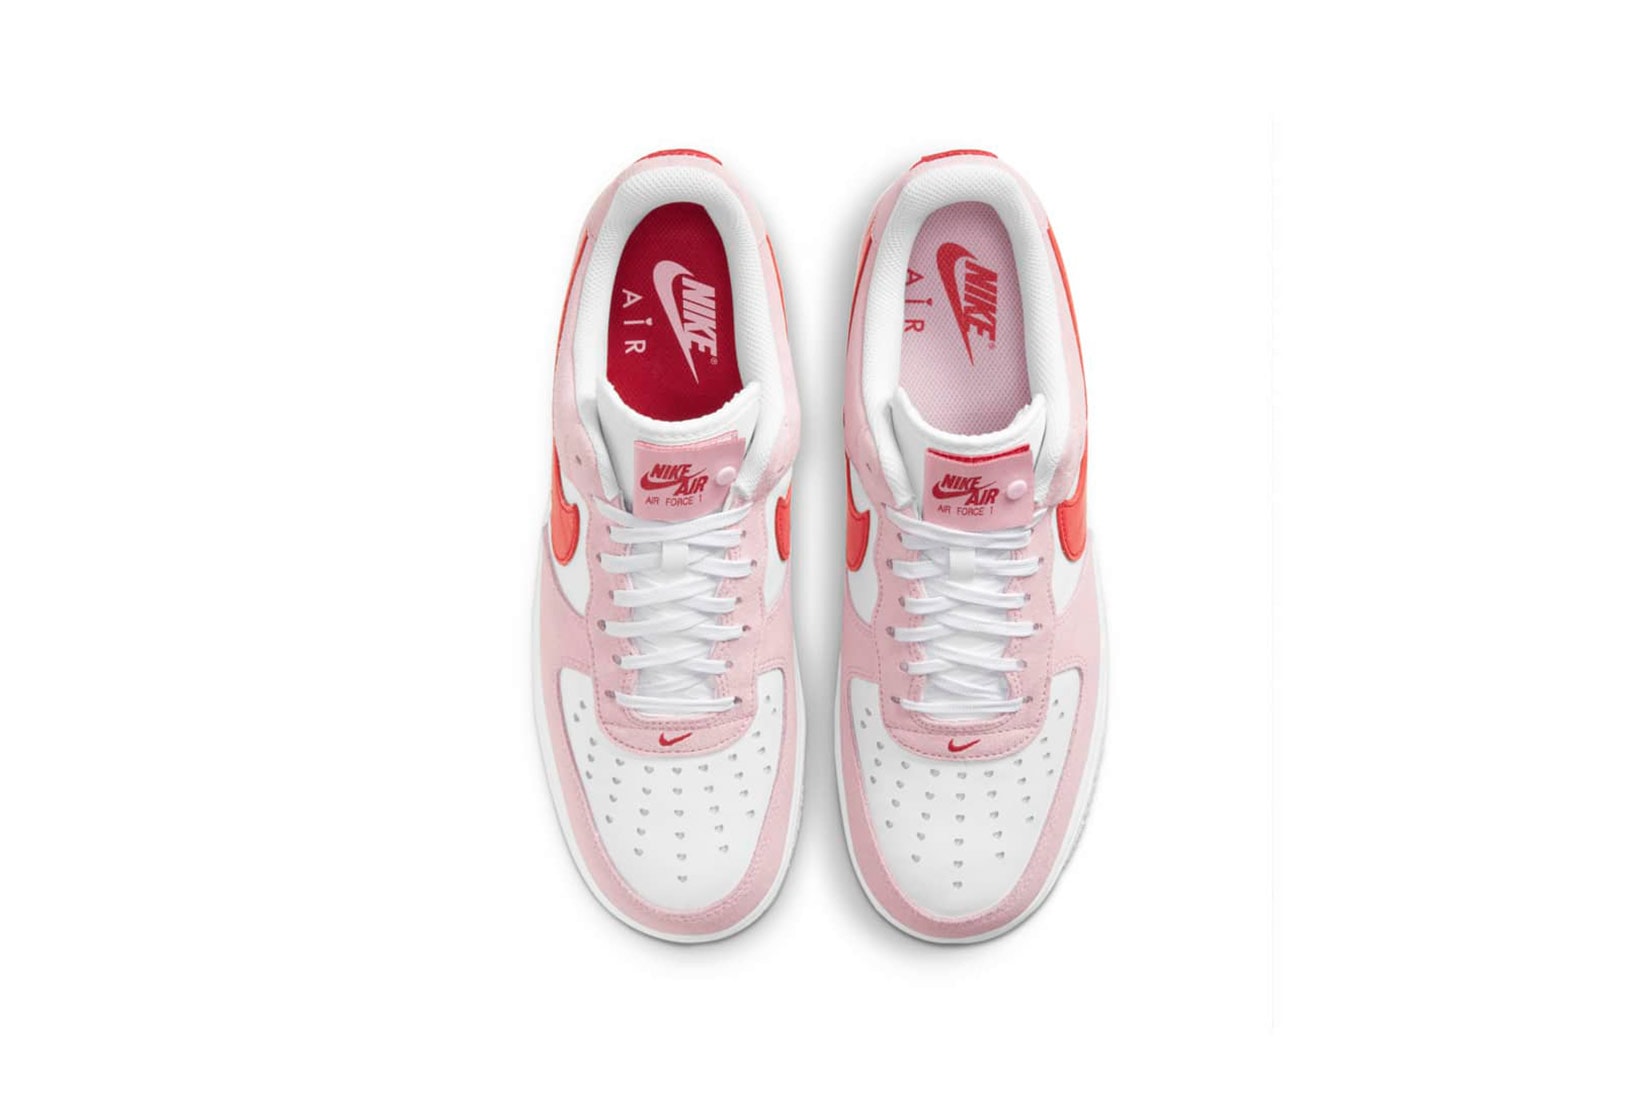 nike air force 1 af1 07 valentines day sneakers pink red white shoes footwear kicks sneakerhead insole laces aerial birds eye view